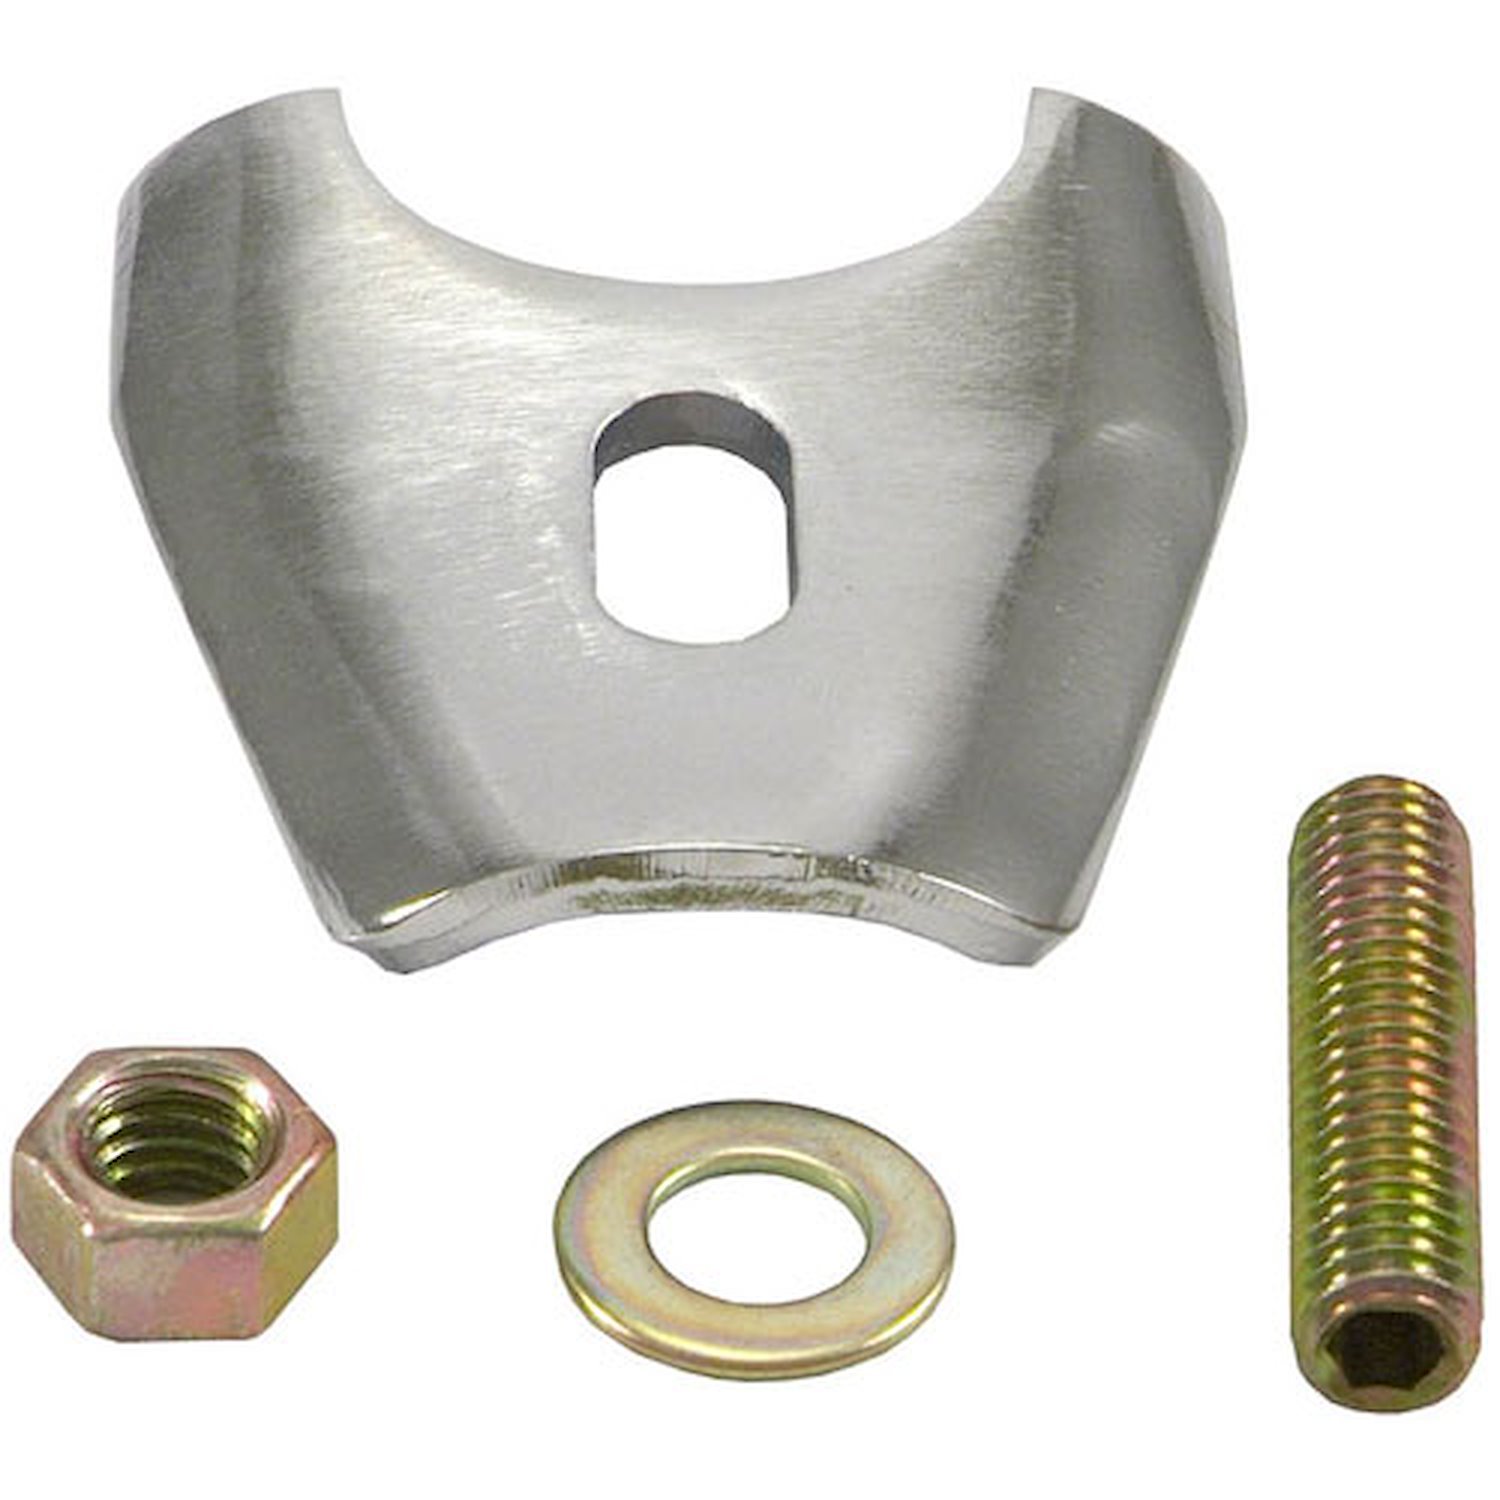 Distributor Hold Down Fits All Chevy V8"s